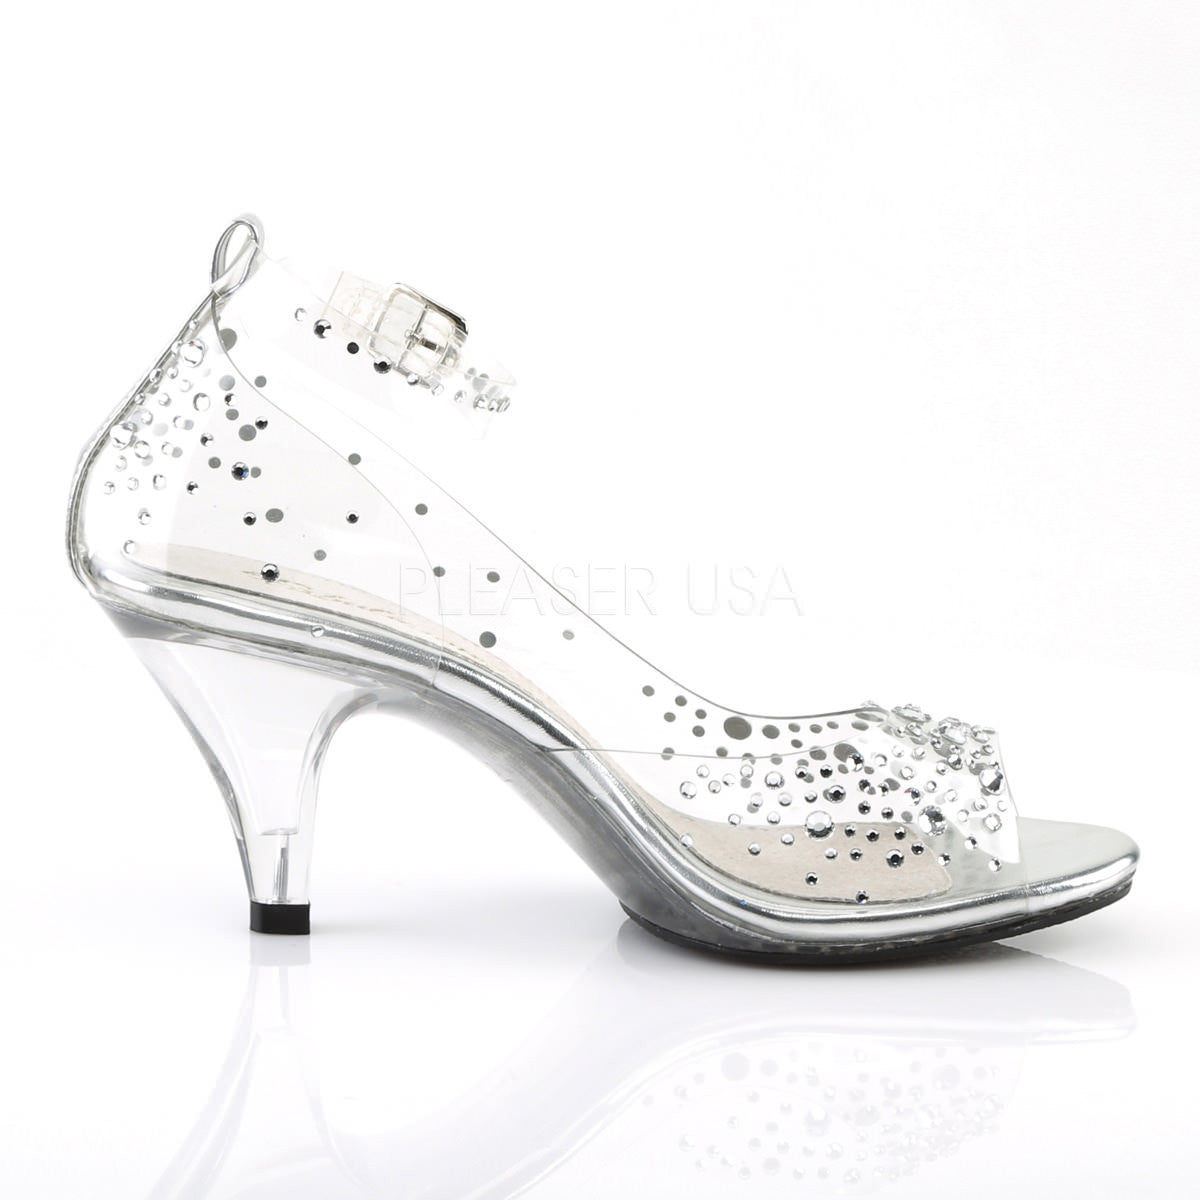 3 Inch Heel BELLE-330RS Clear